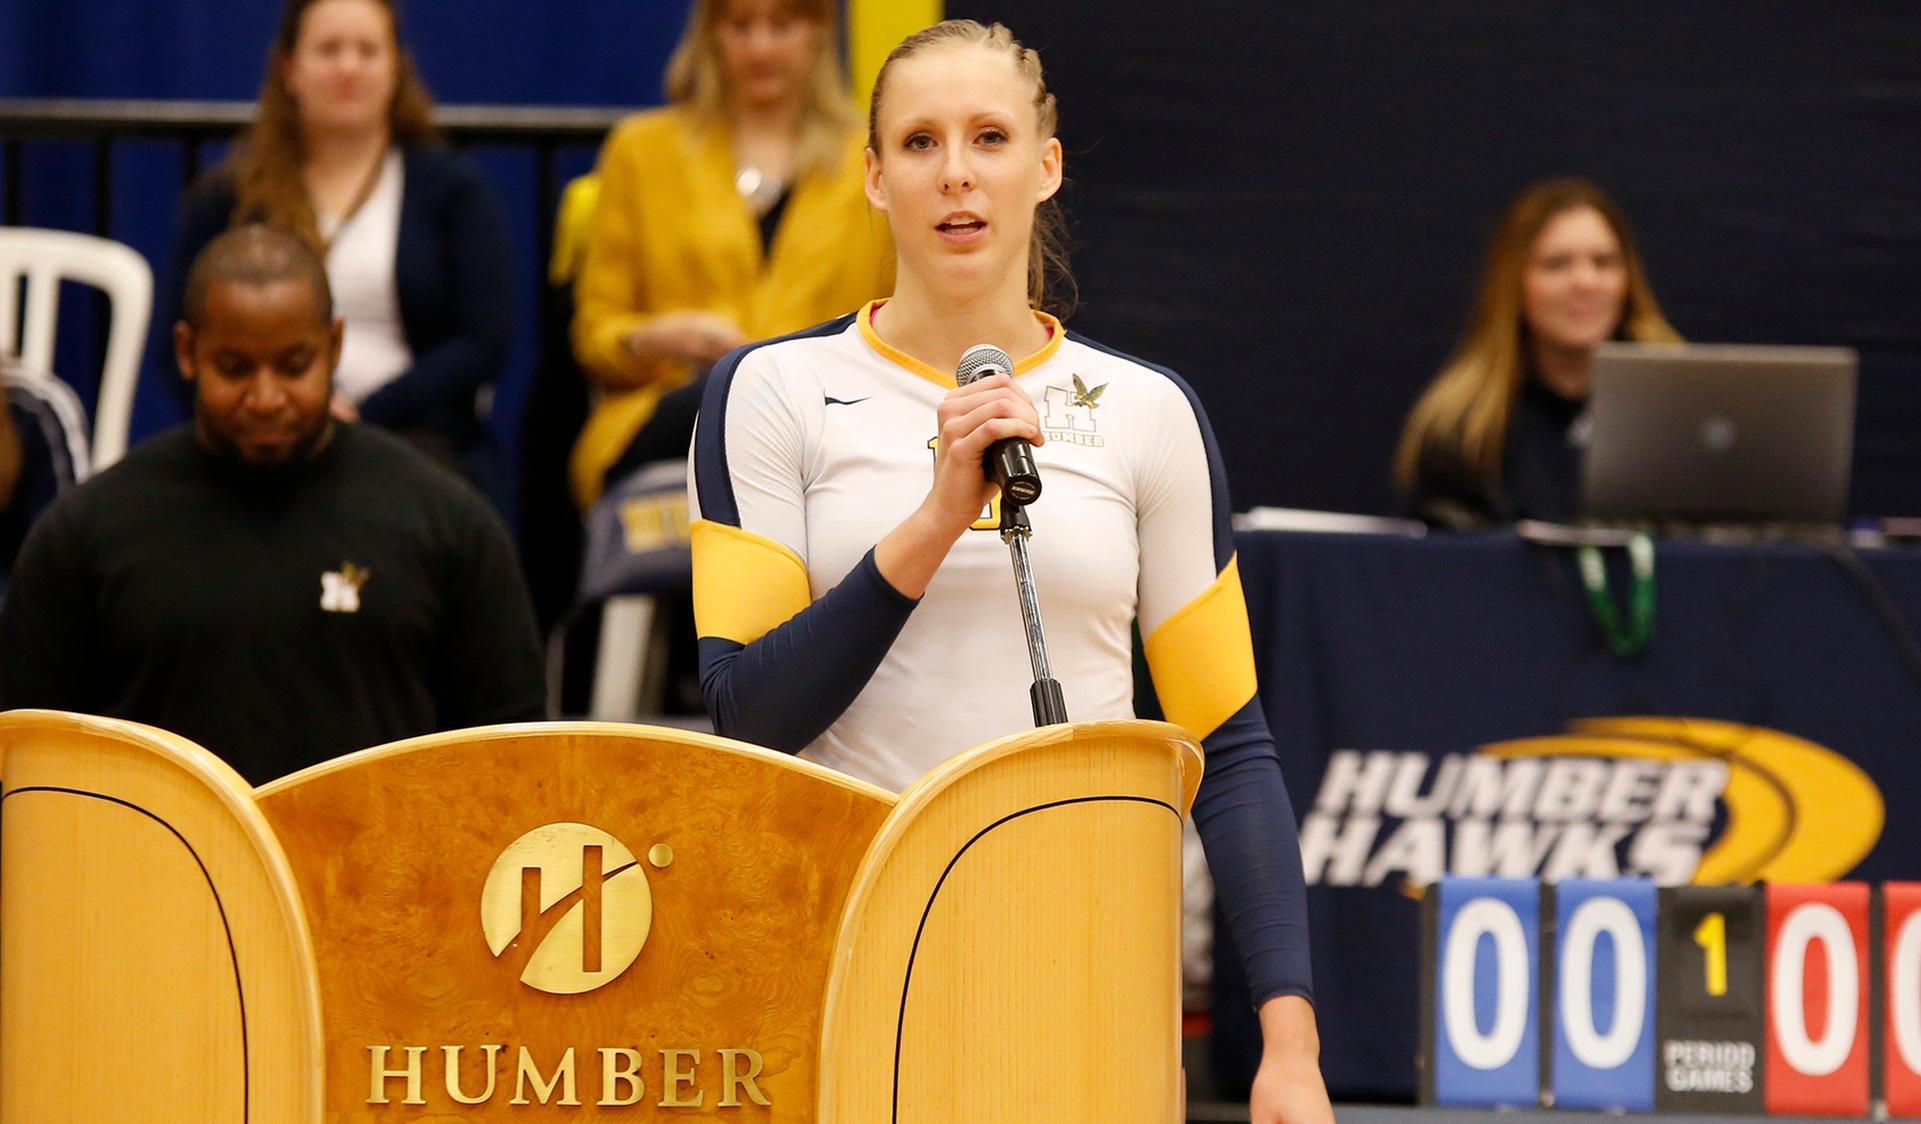 Women's Volleyball Legend Kelly Nyhof Joins Coaching Staff